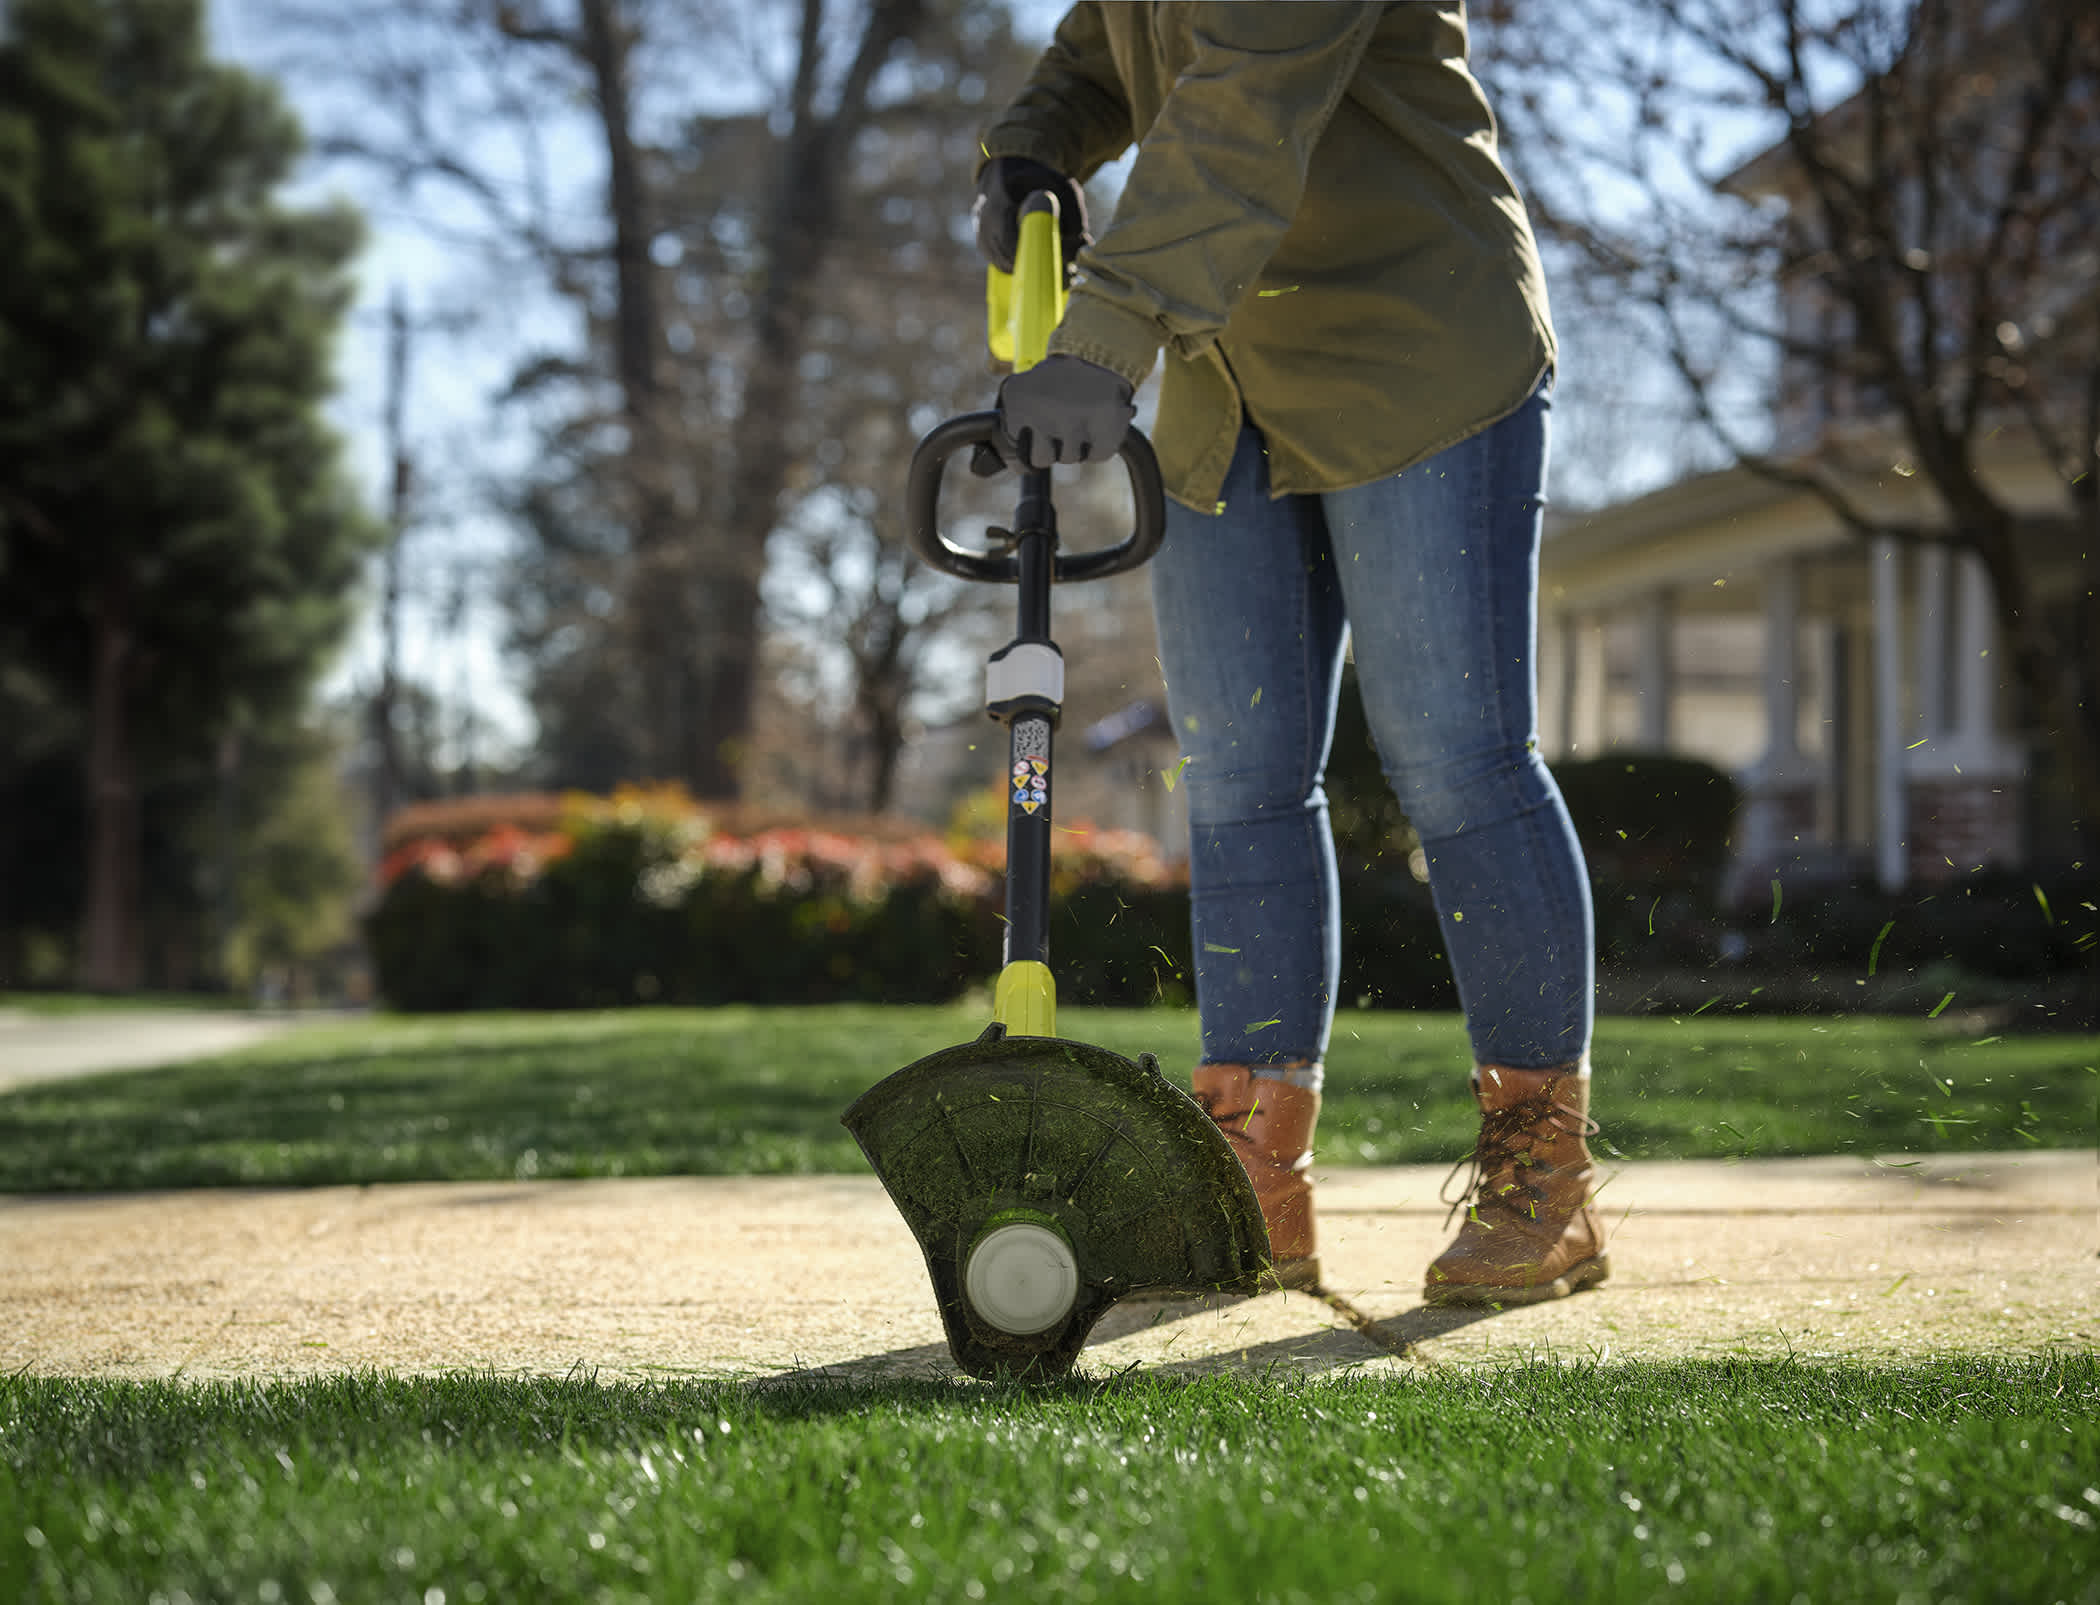 Product Features Image for 18V ONE+ 12" 3-IN-1 STRING TRIMMER, MOWER, AND EDGER KIT.